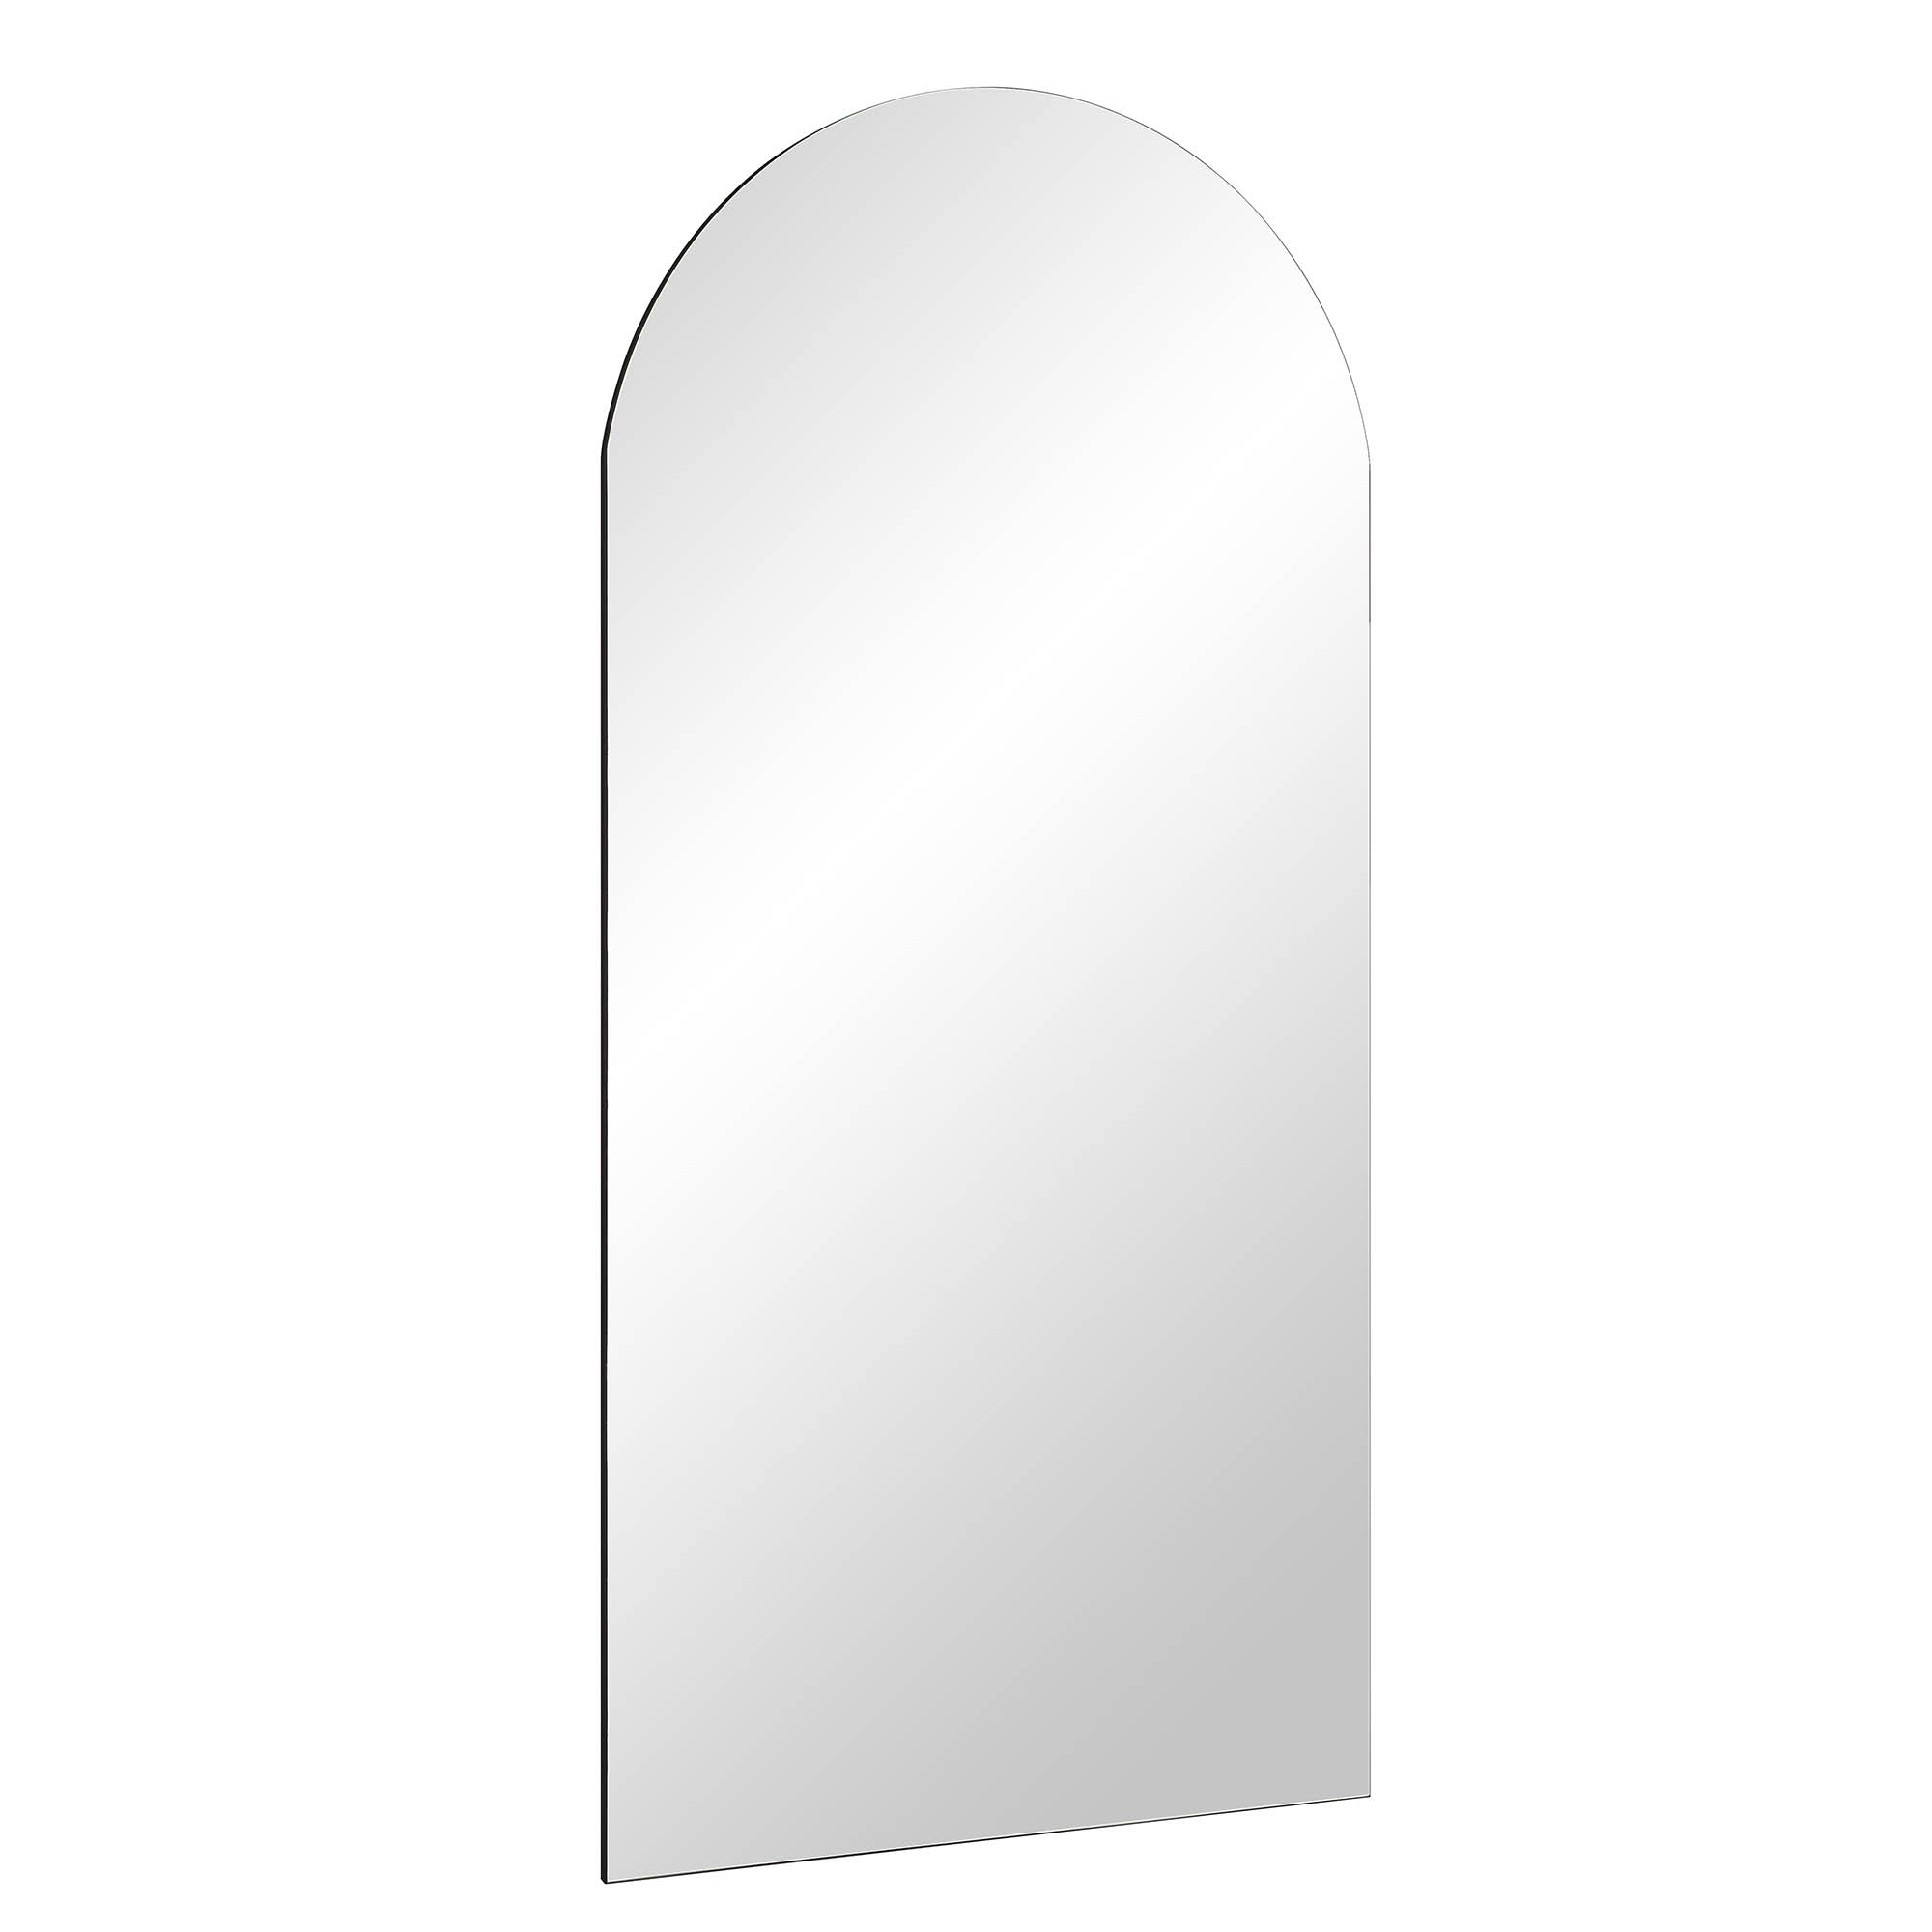 Concord Arched Frameless Full Length Mirror 170 x 80 cm